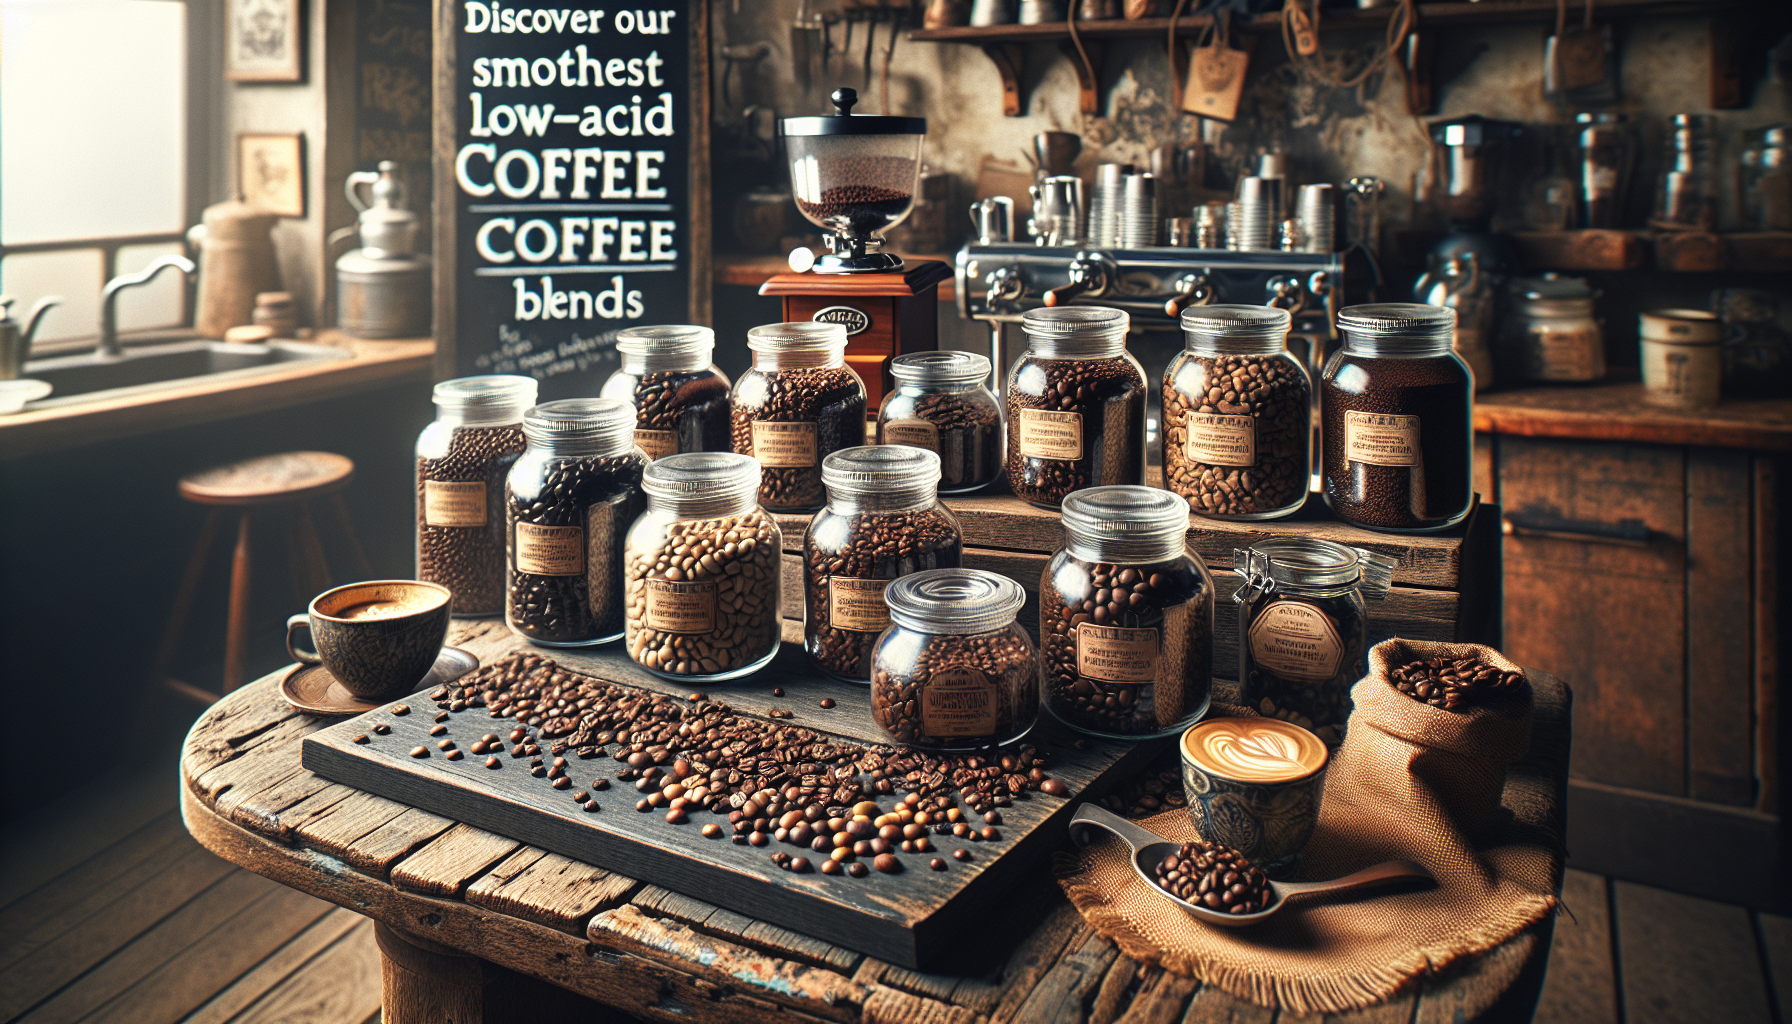 Imagine an artisan coffee shop, the air filled with the rich aroma of freshly ground beans. On a rustic, weathered wooden table, there is a tantalizing display of various low-acid coffee blends. Each 